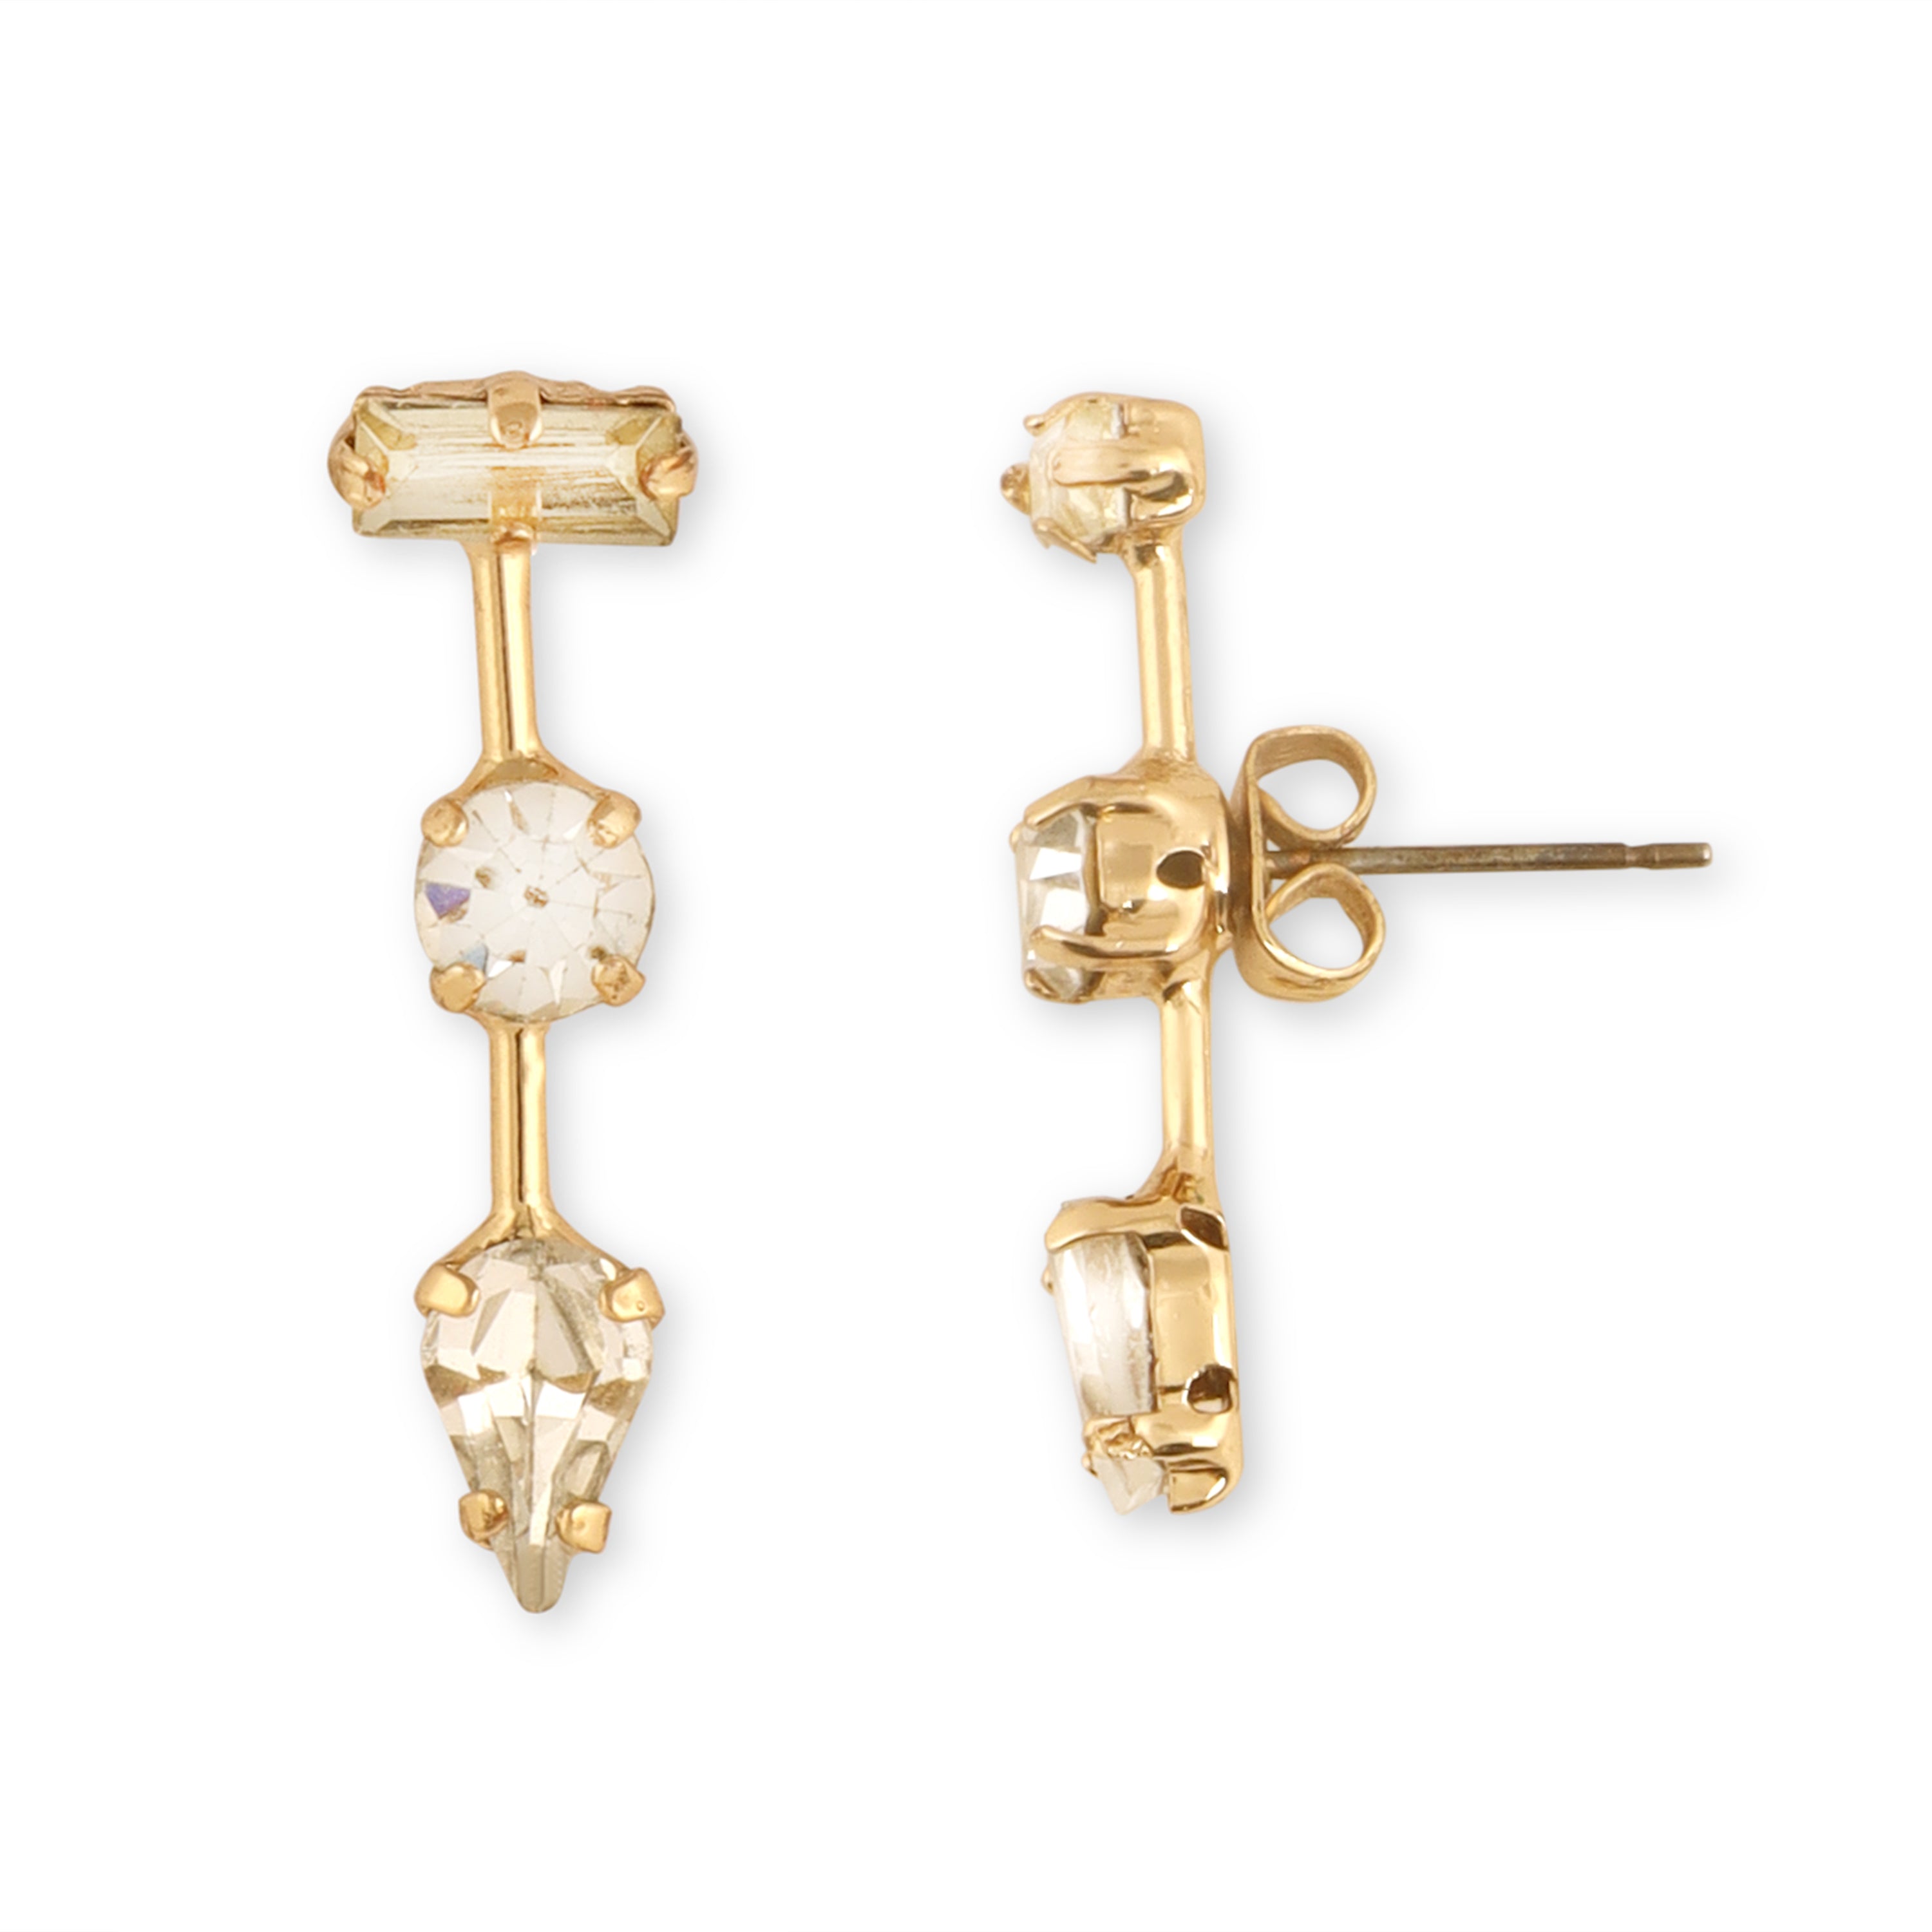 TFC Stone Gold Plated Stud Earrings-Discover daily wear gold earrings including stud earrings, hoop earrings, and pearl earrings, perfect as earrings for women and earrings for girls.Find the cheapest fashion jewellery which is anti-tarnis​h only at The Fun company